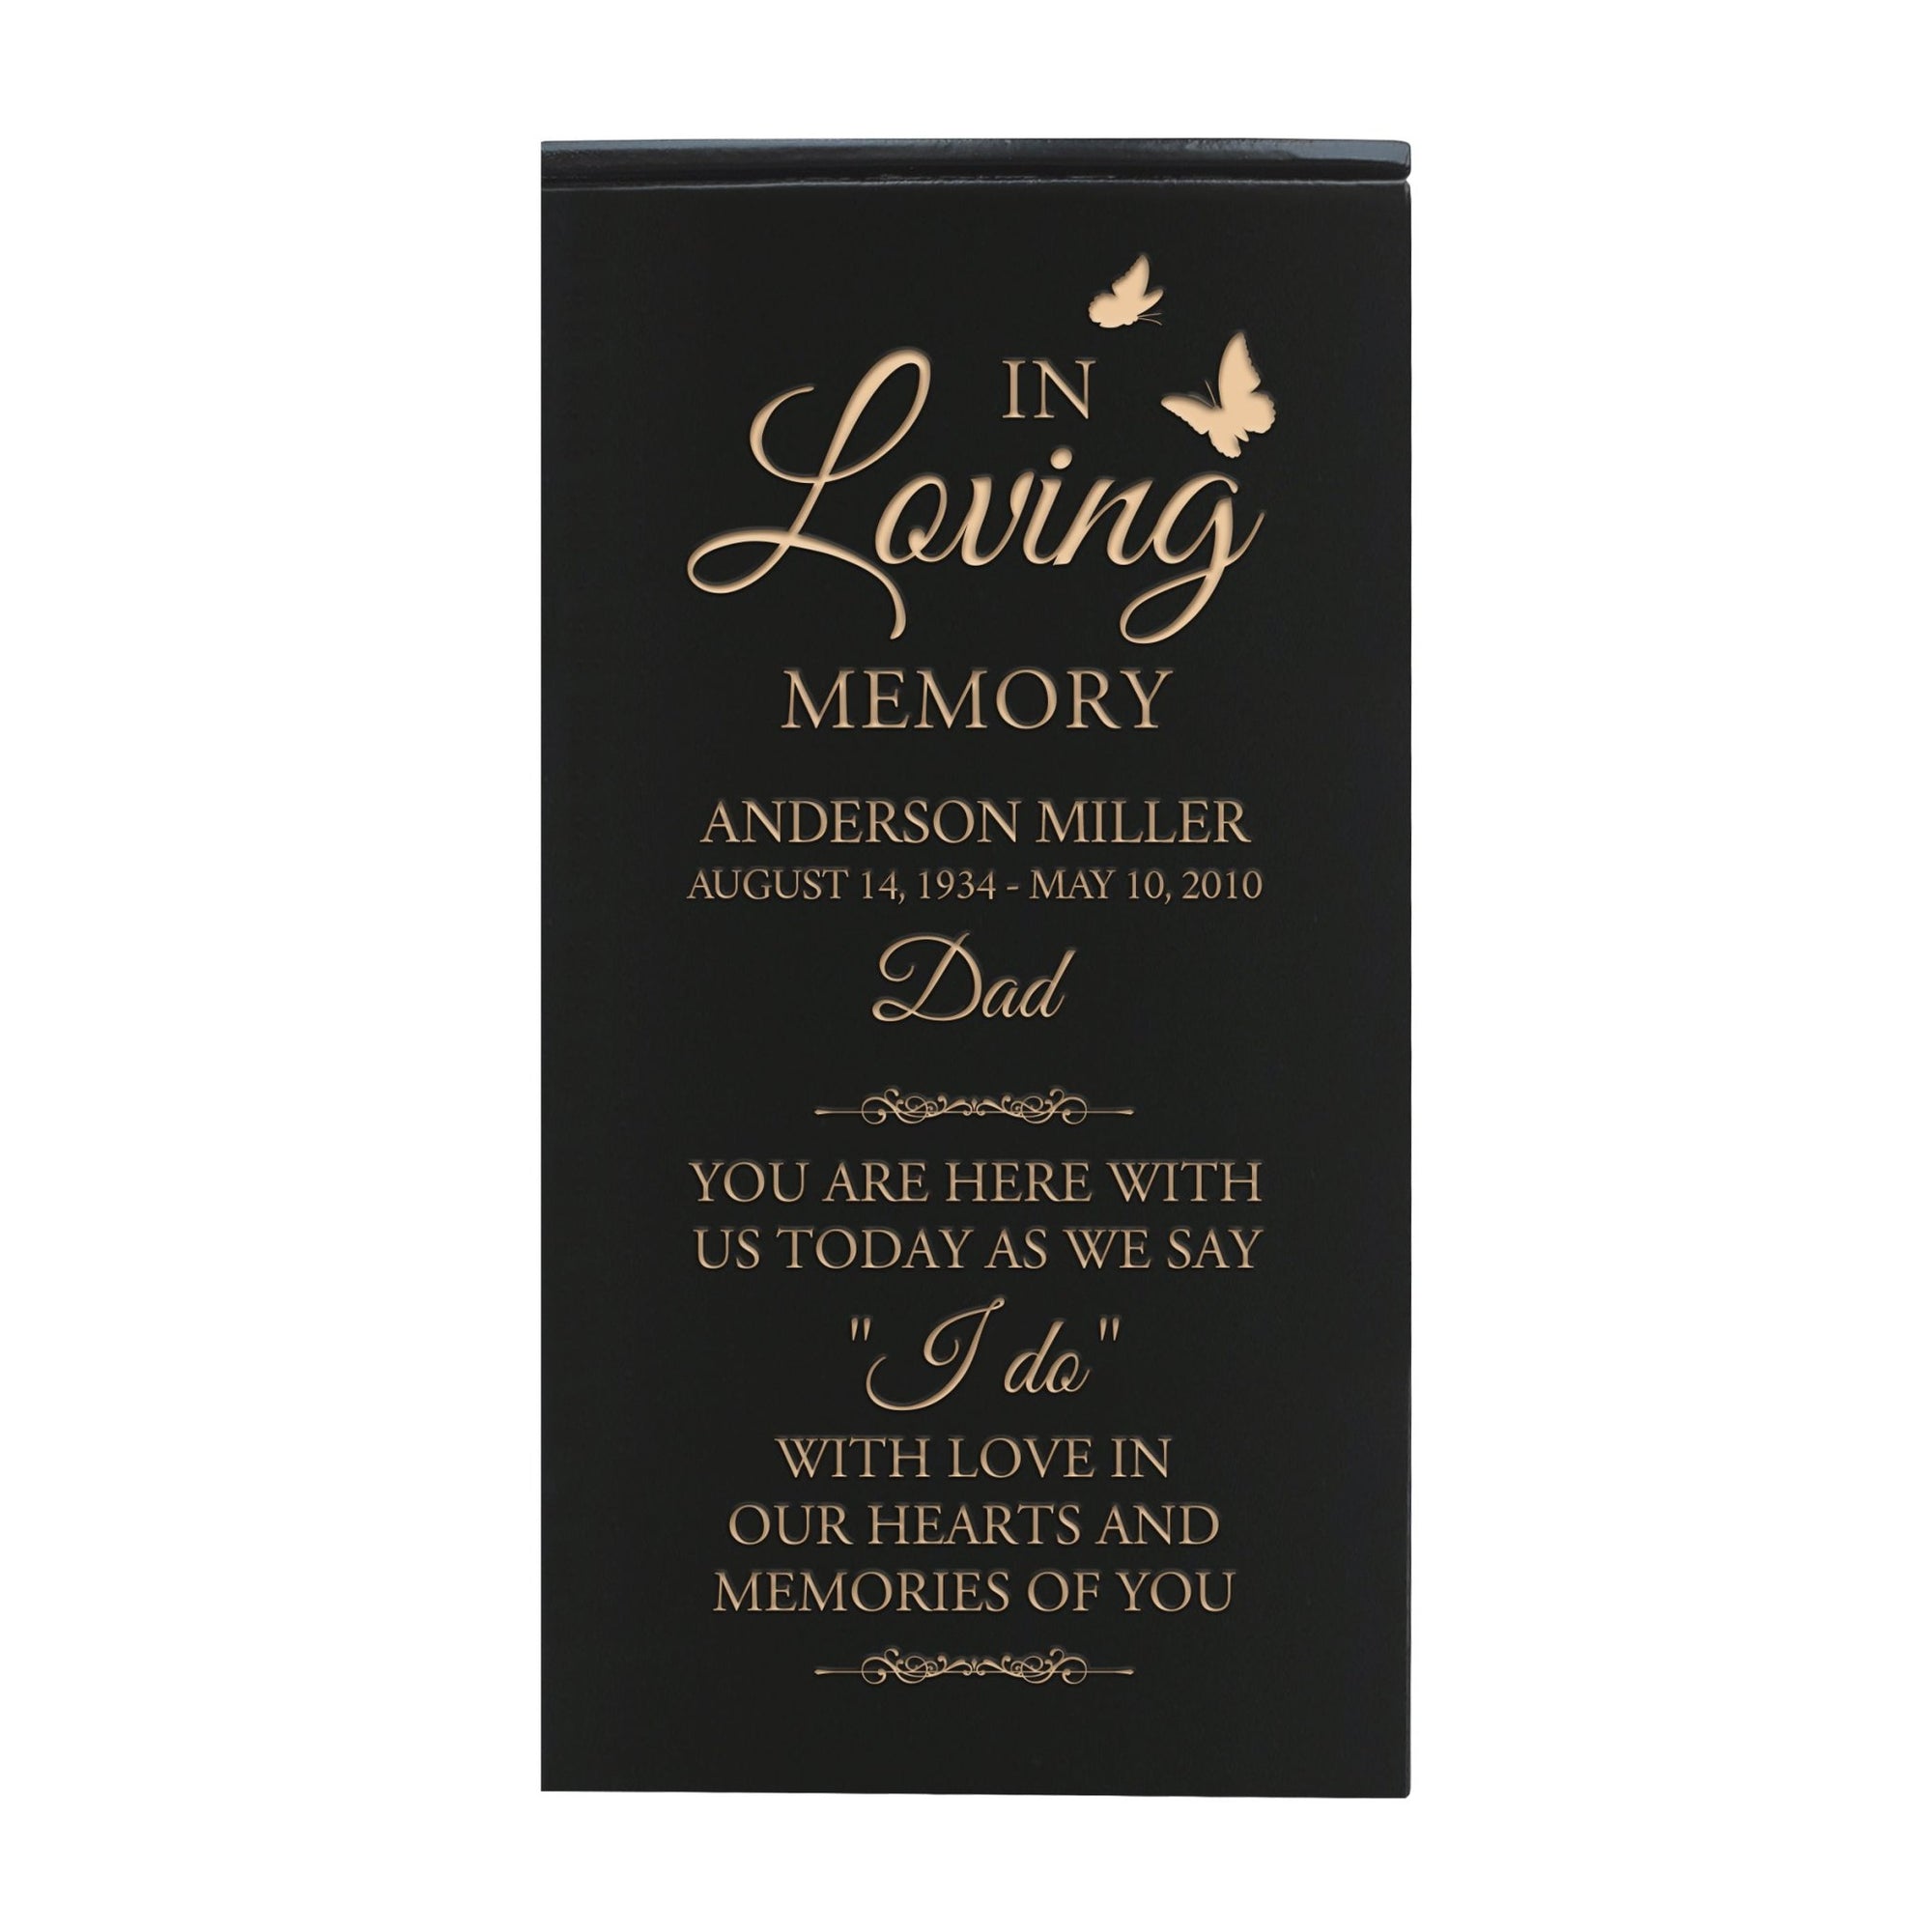 Custom Engraved Memorial Keepsake Urn Box holds 100 cu in of Ashes In Loving Memory - Dad, You Are Here - LifeSong Milestones